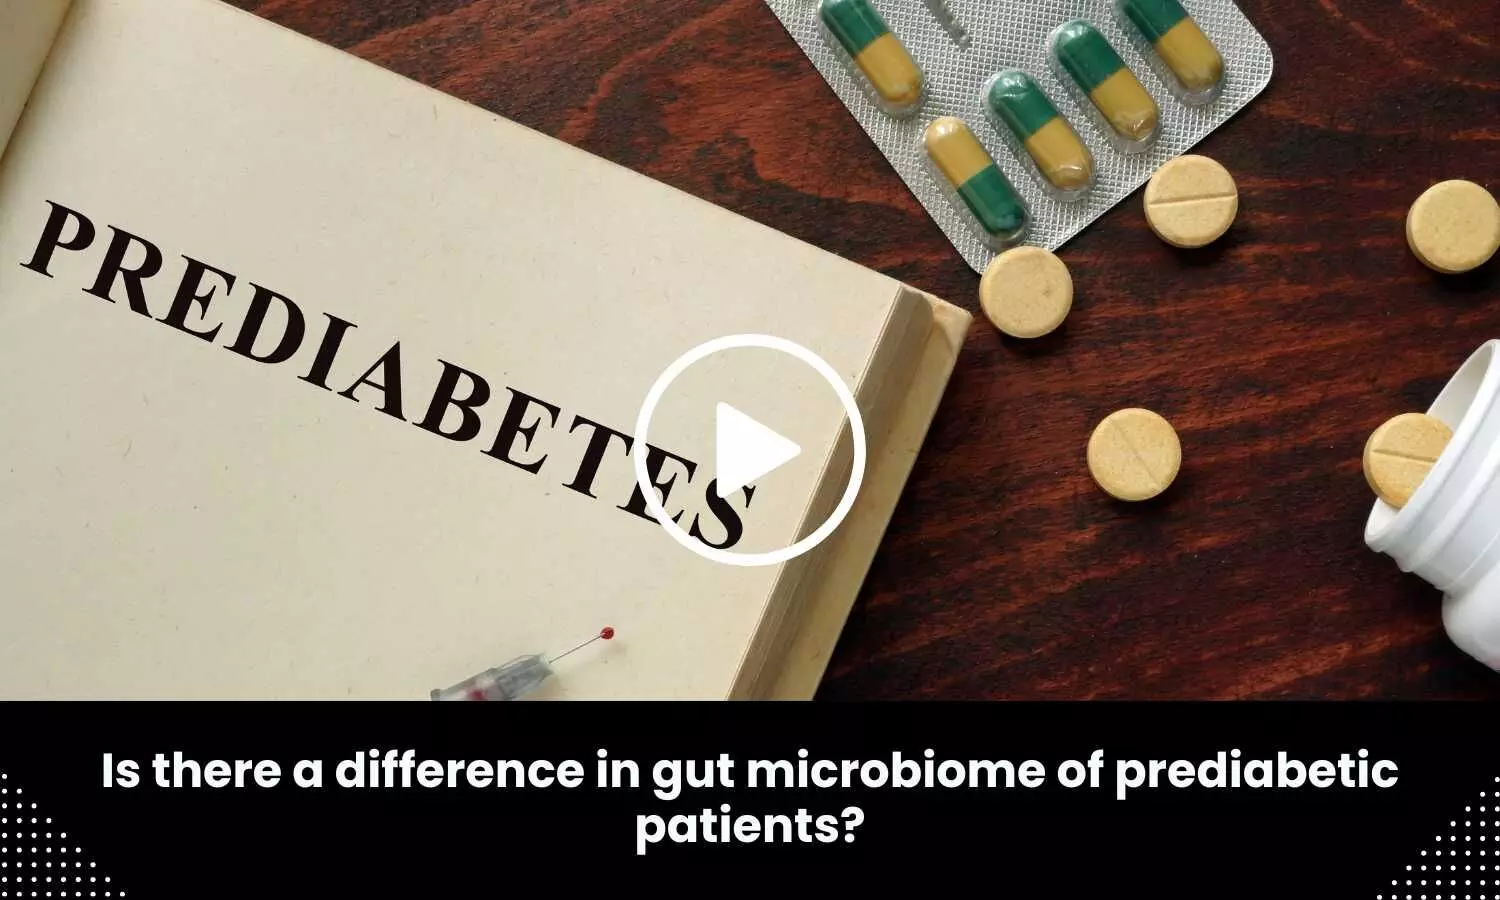 Is there a difference in gut microbiome of prediabetic patients? Study sheds light